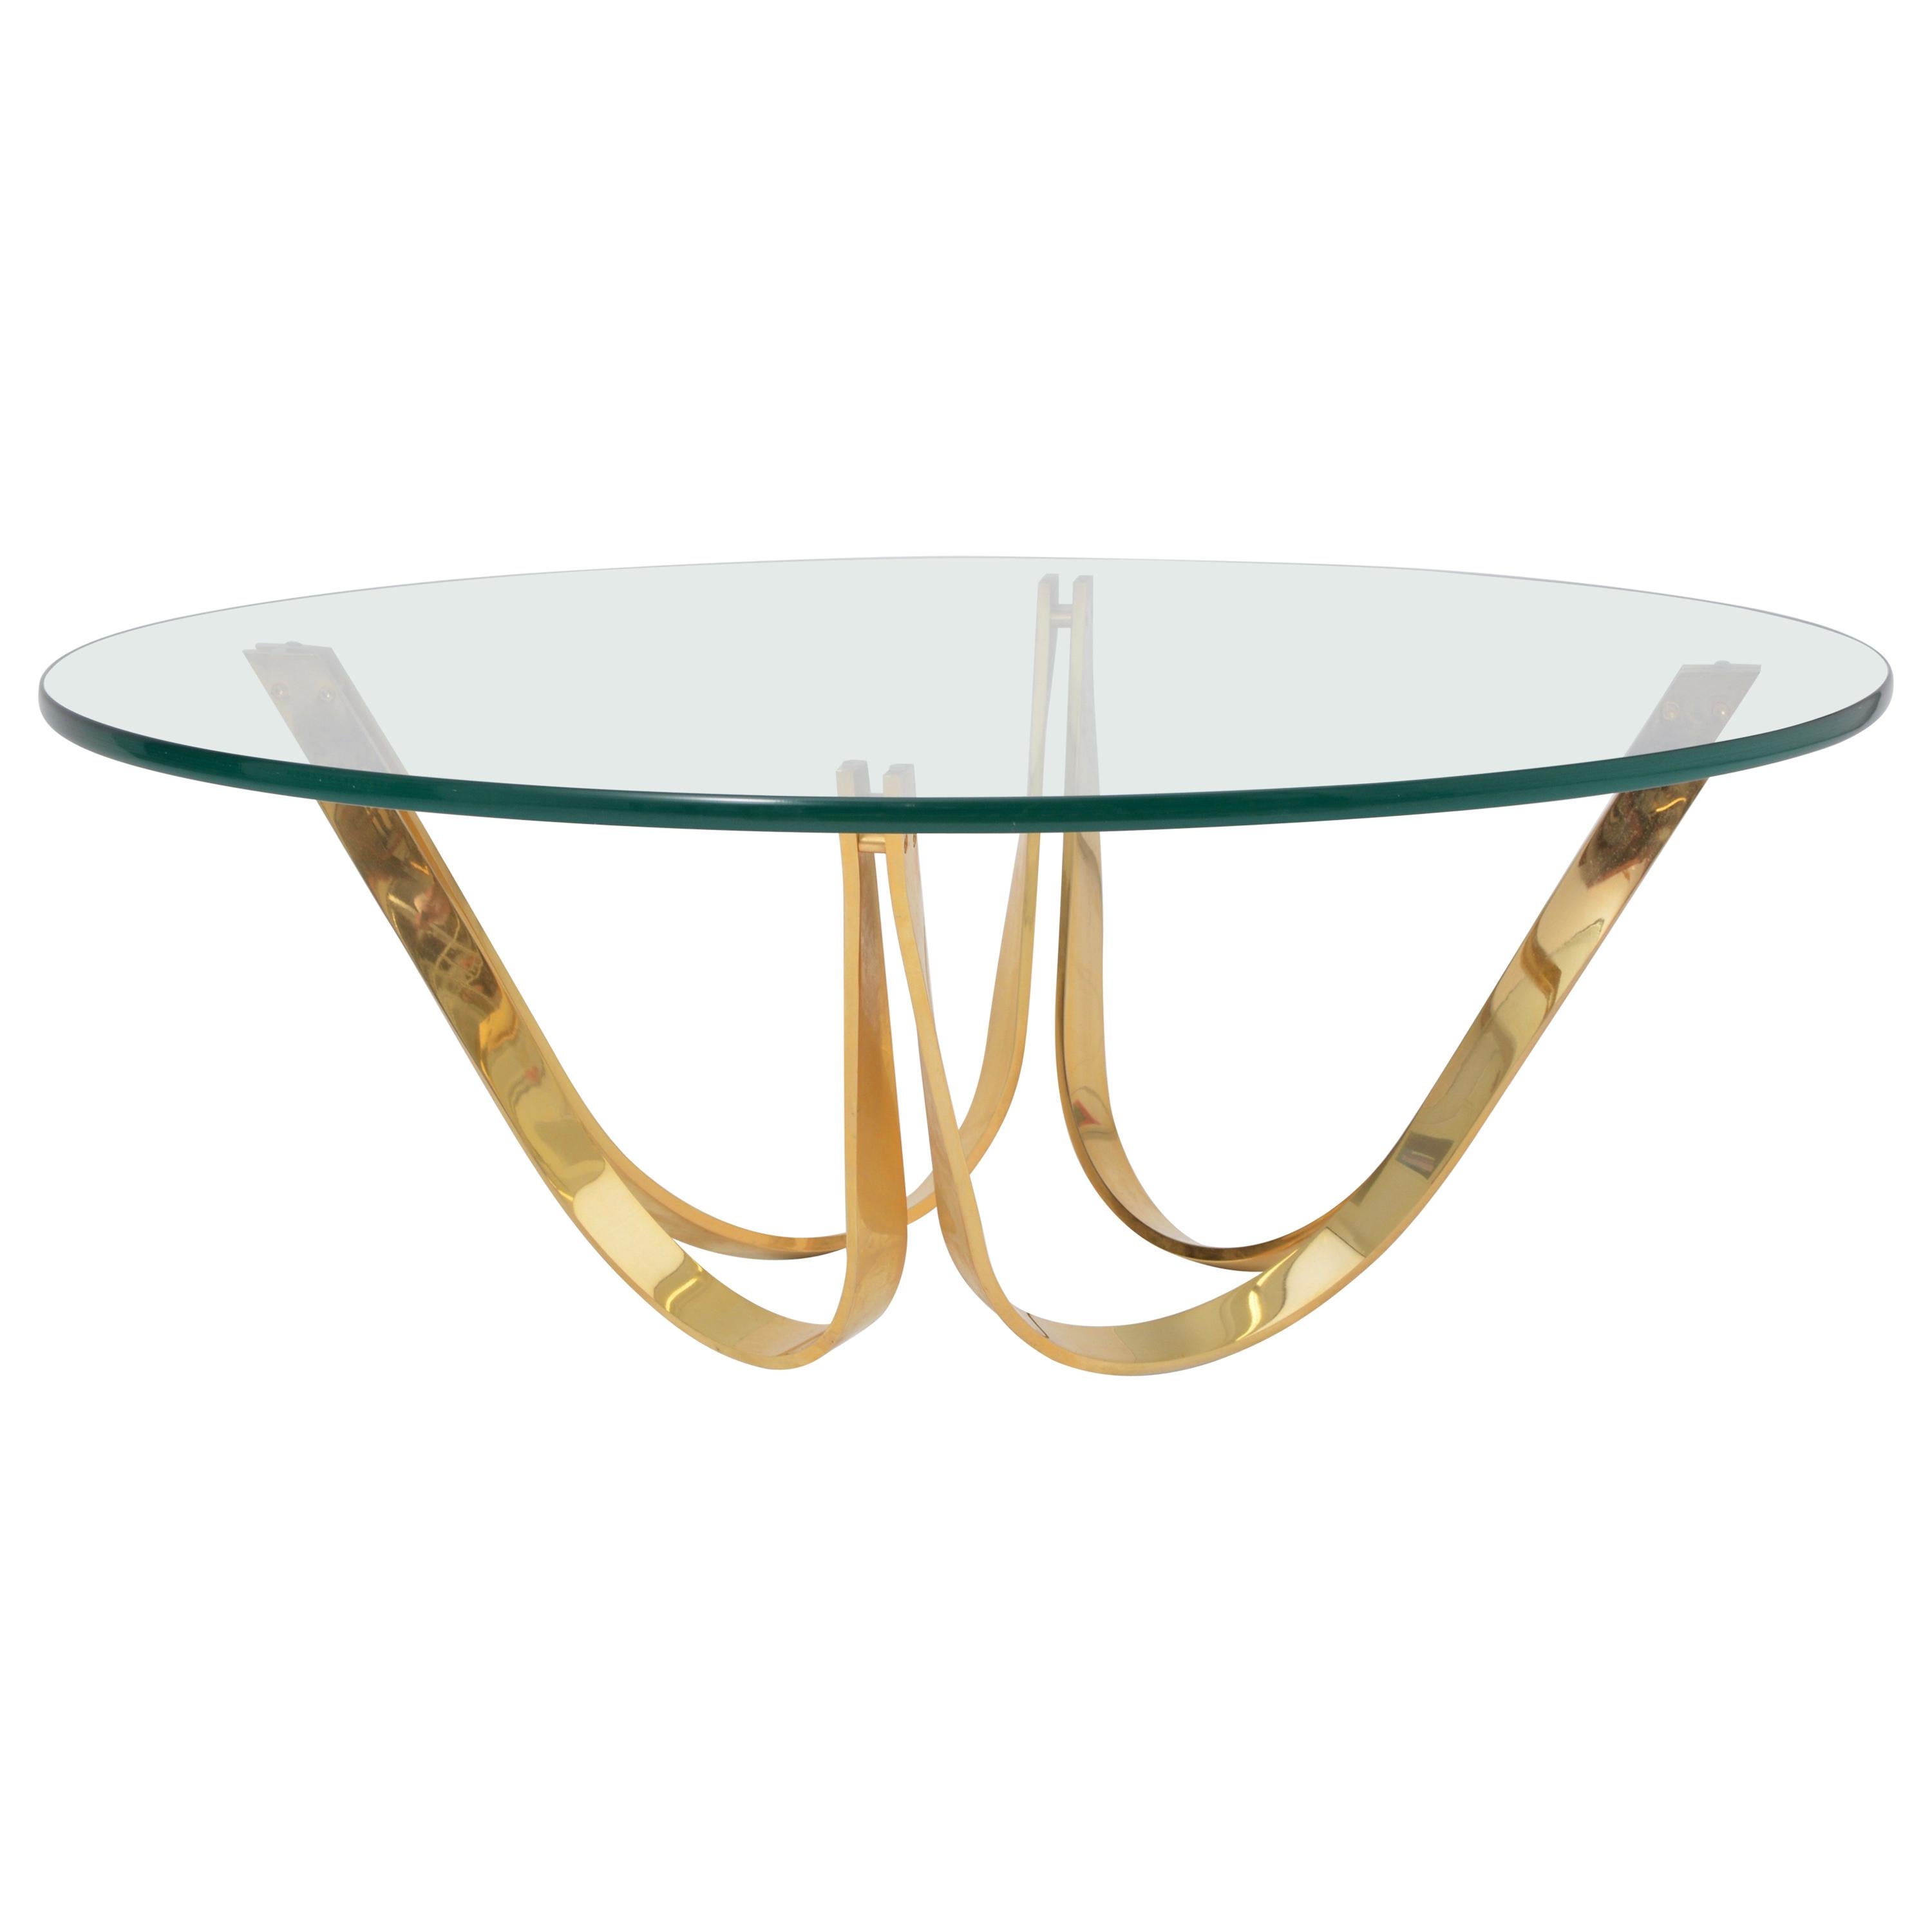 Golden Round Midcentury Coffee Table by Roger Sprunger for Dunbar